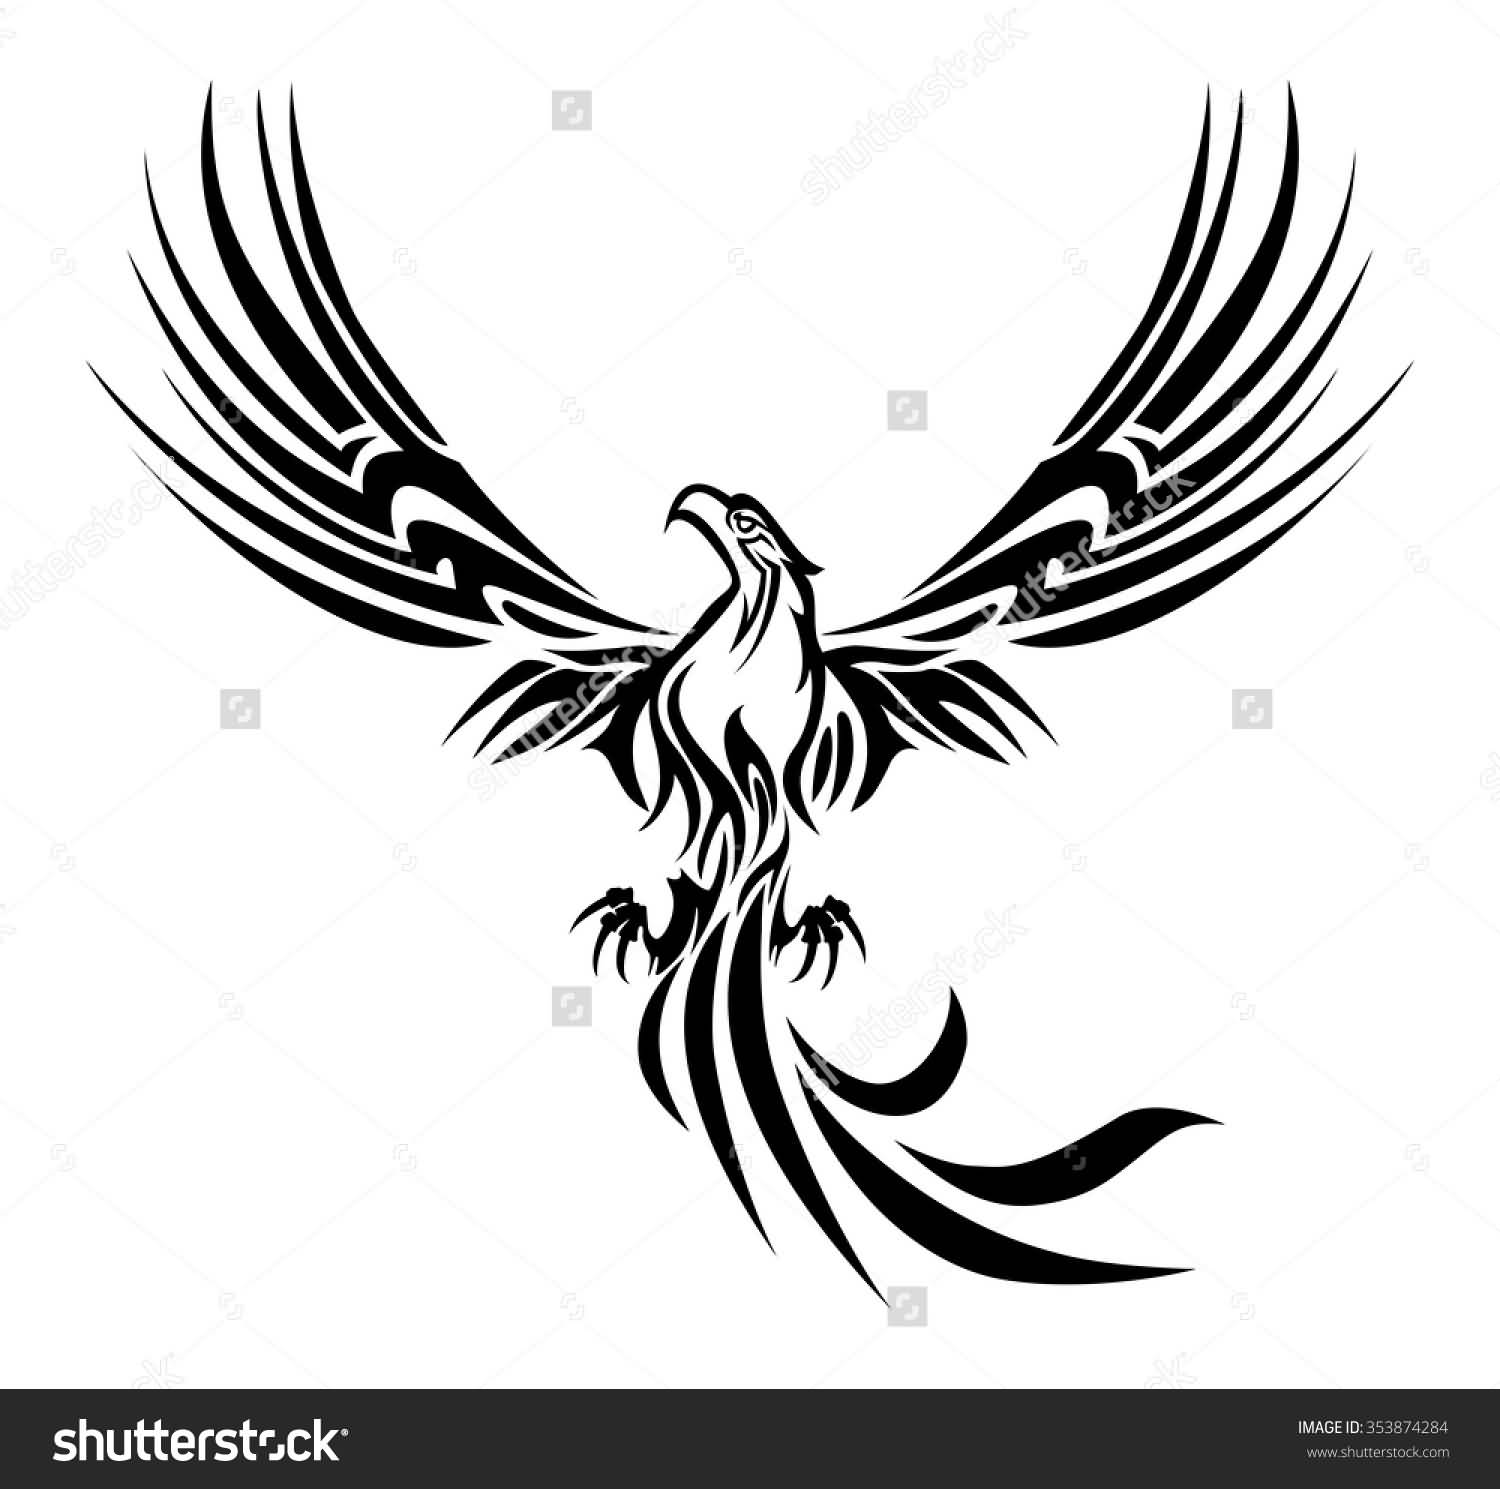 Black Tribal Flying Rising Phoenix From The Ashes Tattoo Design